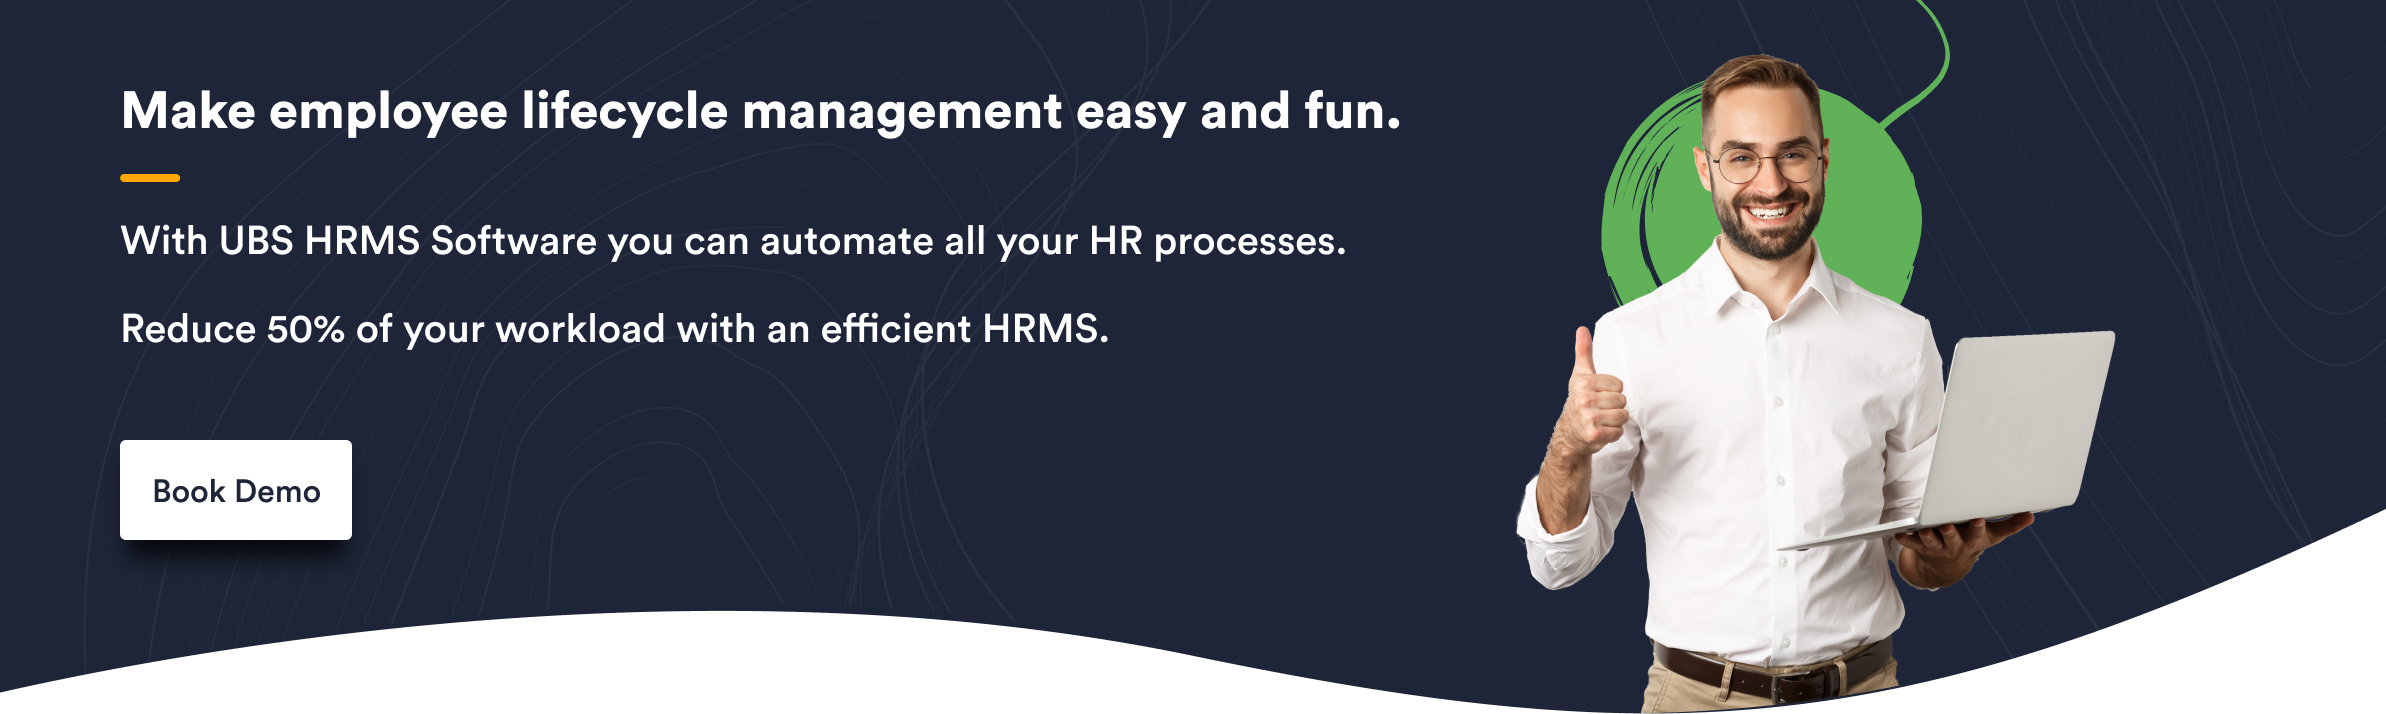 Make employee lifecycle management easy and fun.